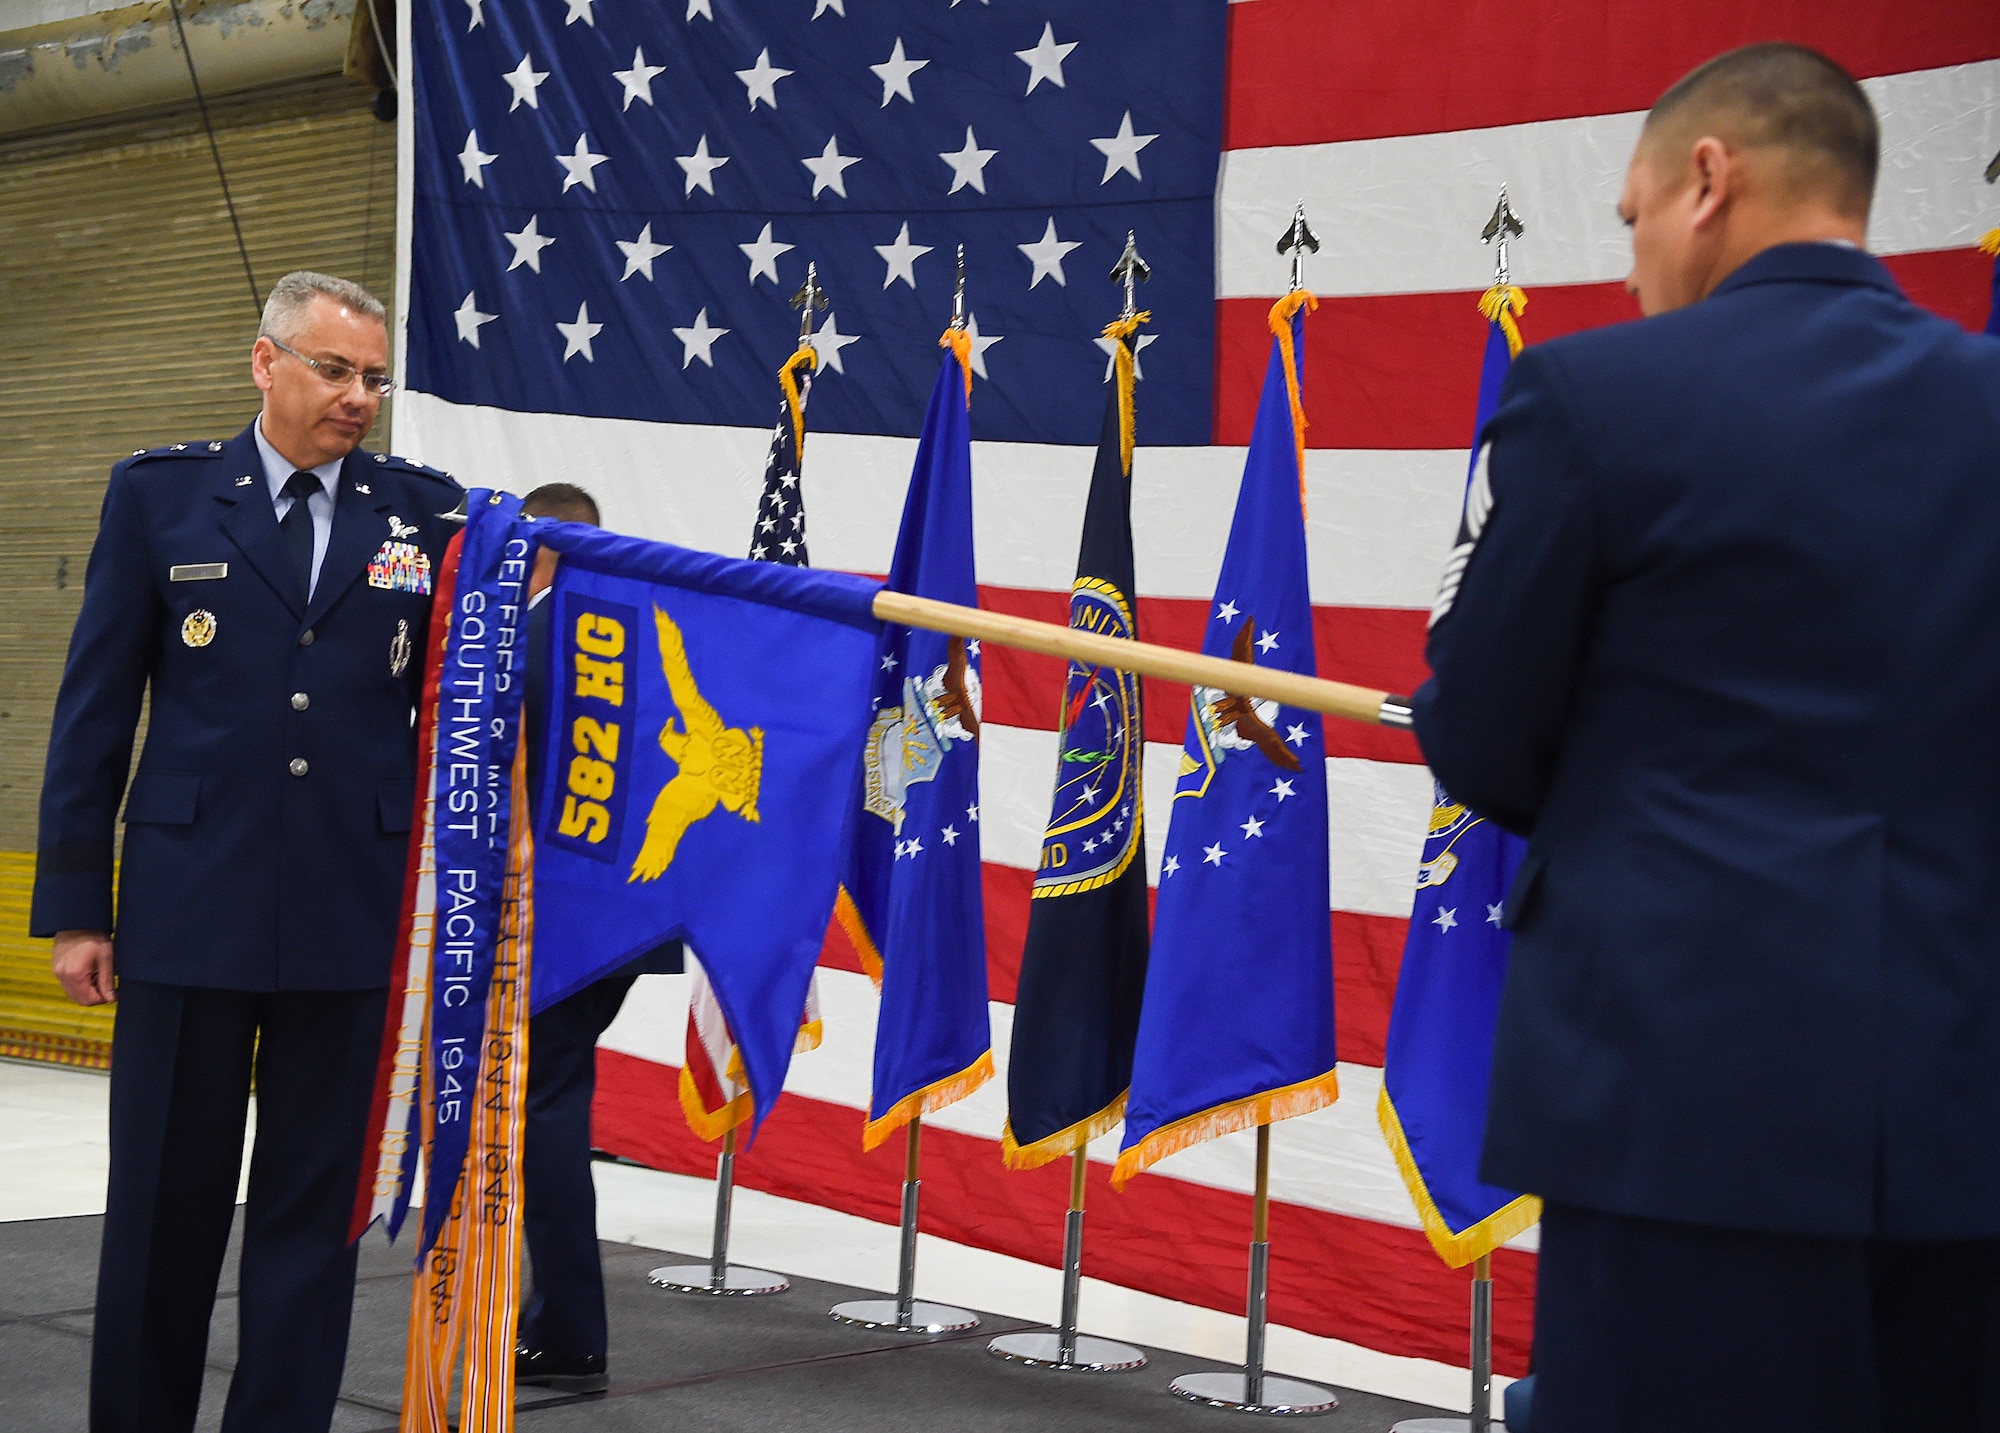 Maj. Gen. Jack Weinstein, Task Force 214 and 20th Air Force commander, unfurls the guidon of the 582nd Helicopter Group during an activation and assumption of command ceremony March 27, 2015, on F.E. Warren Air Force Base, Wyo. The new group, comprised of the three helicopter squadrons under 20th AF and the newly established 582nd Operations Support Squadron, was formed to improve mission effectiveness and standardize helicopter operations throughout the 20th AF. (U.S. Air Force photo by R.J. Oriez/Released)